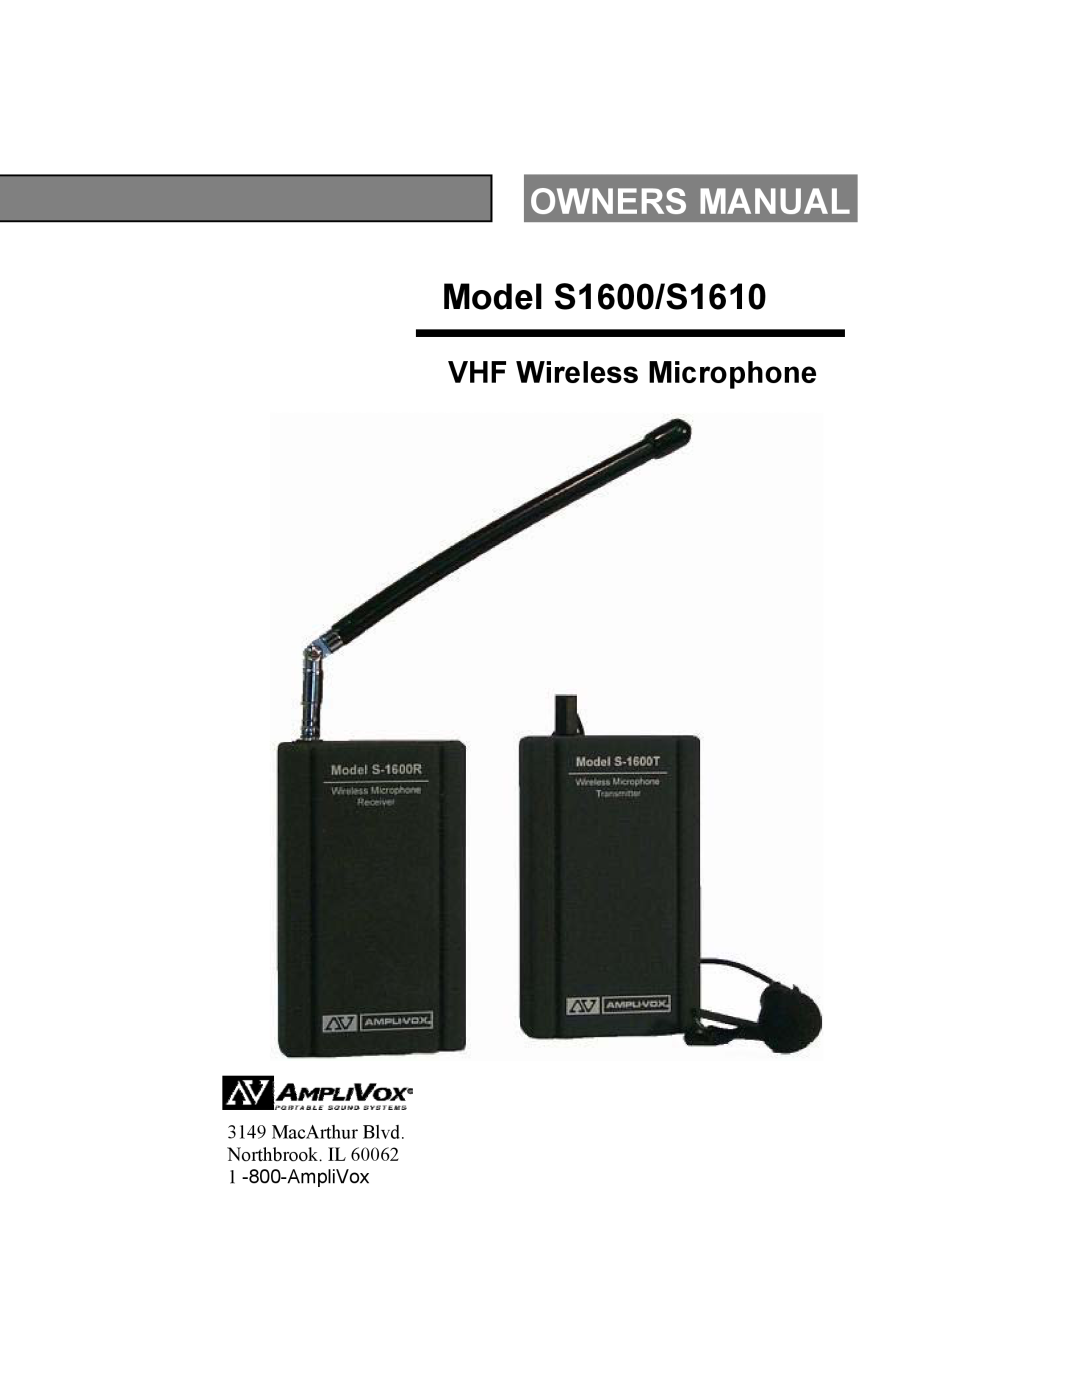 AmpliVox owner manual Owners Manual, MacArthur Blvd Northbrook. IL, Model S1600/S1610, VHF Wireless Microphone 